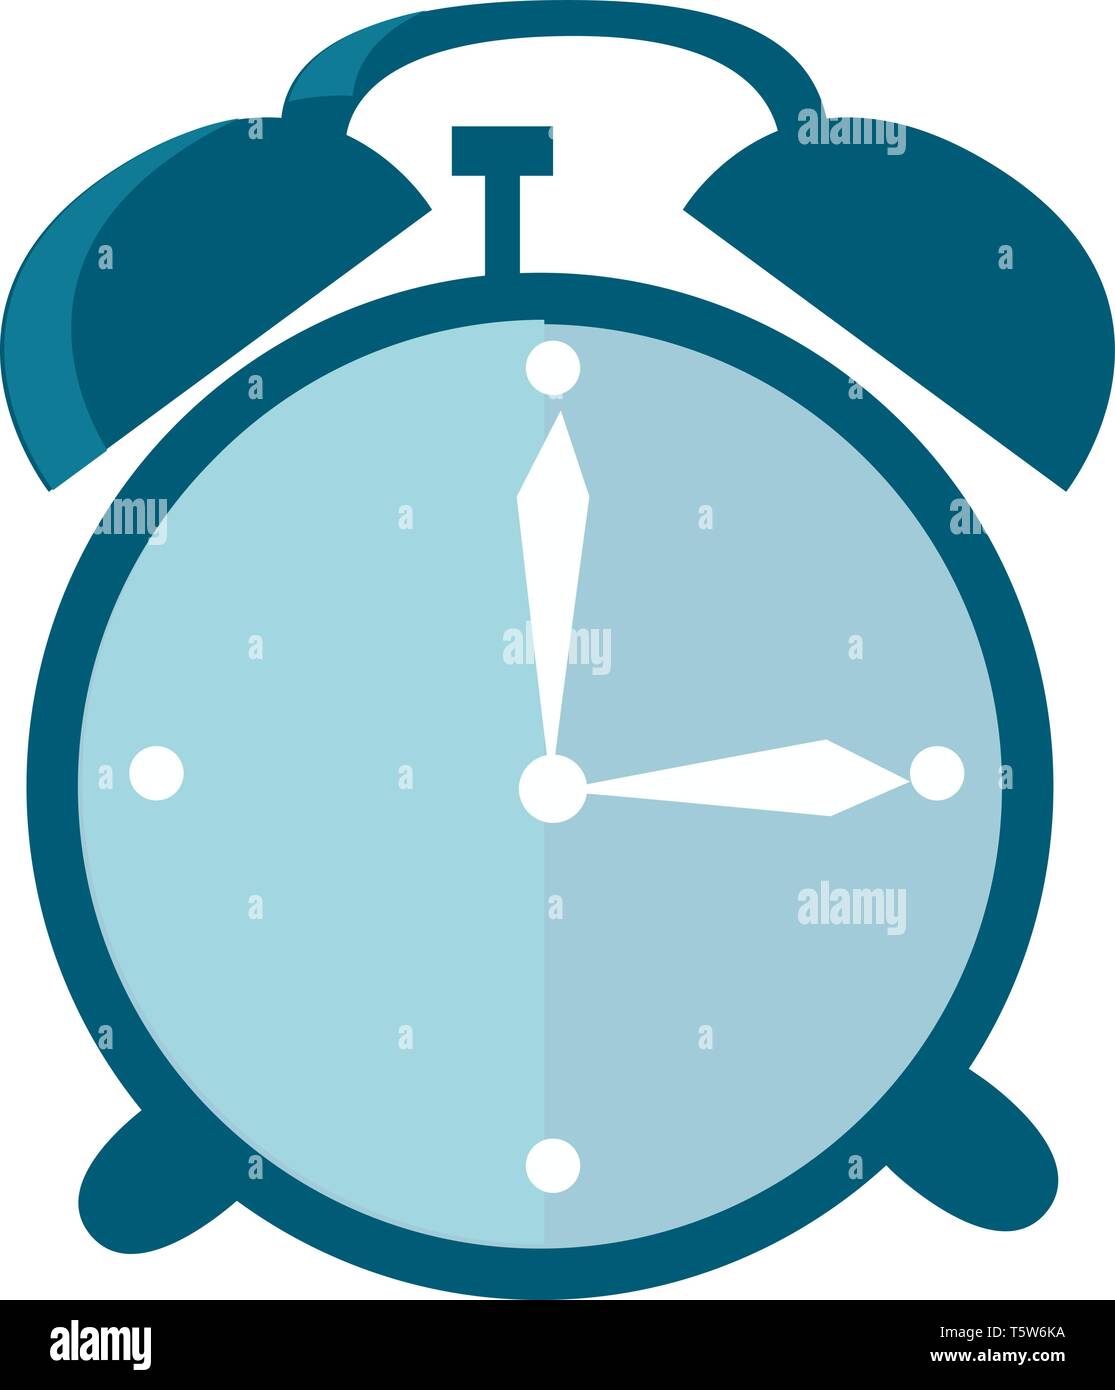 A teal colored alarm clock with white colored hands, vector, color drawing or illustration. Stock Vector